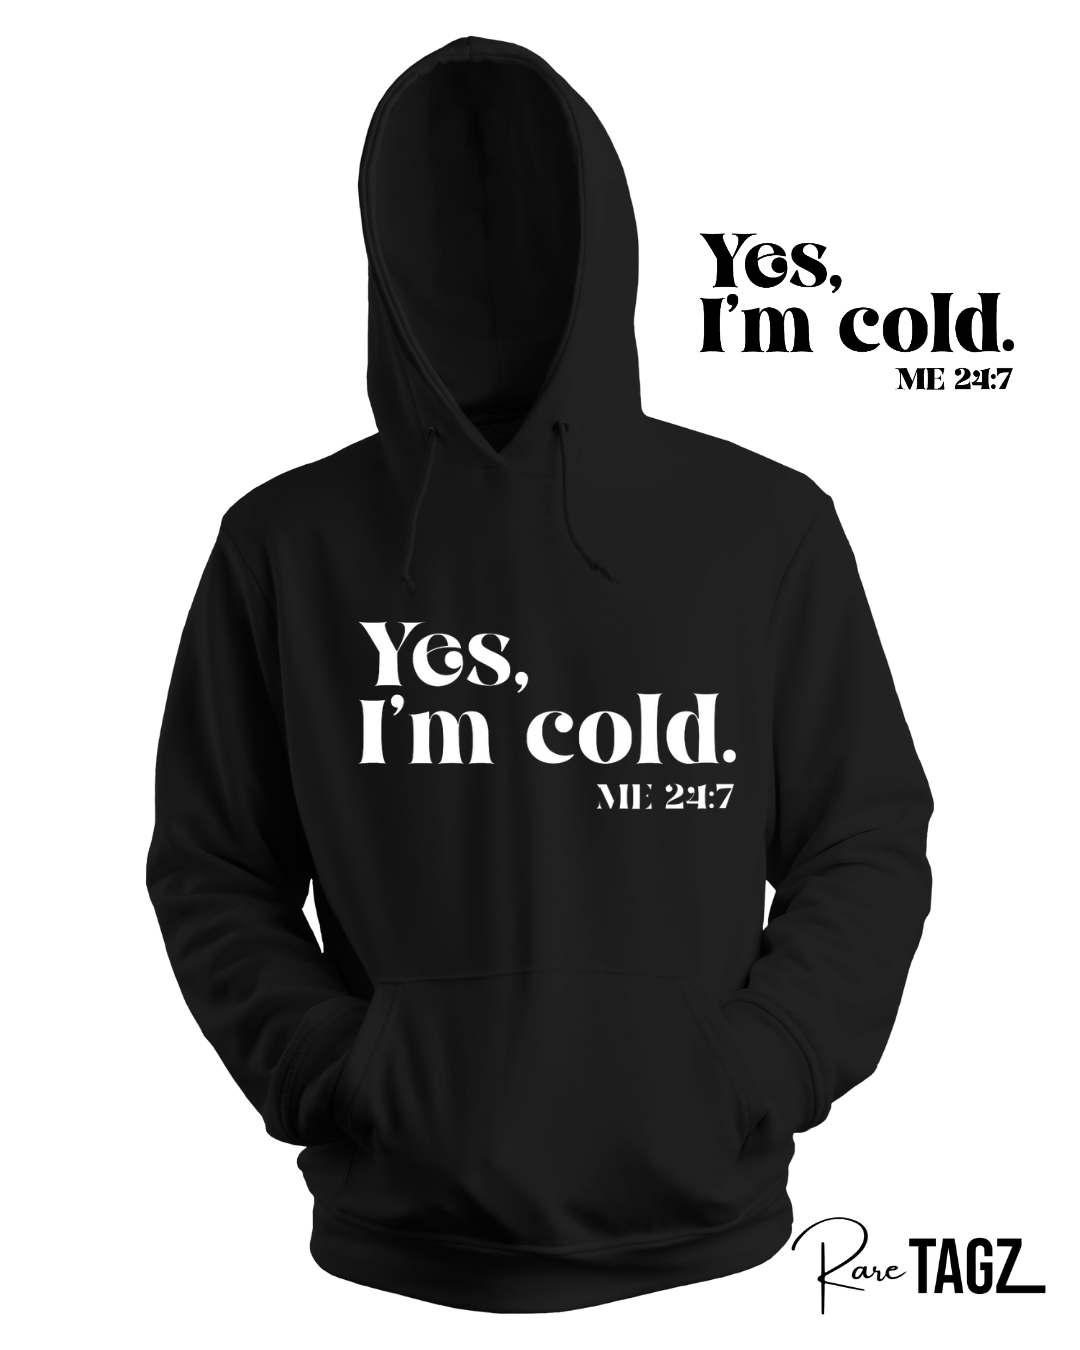 "Yes I'm Cold. 24/7"